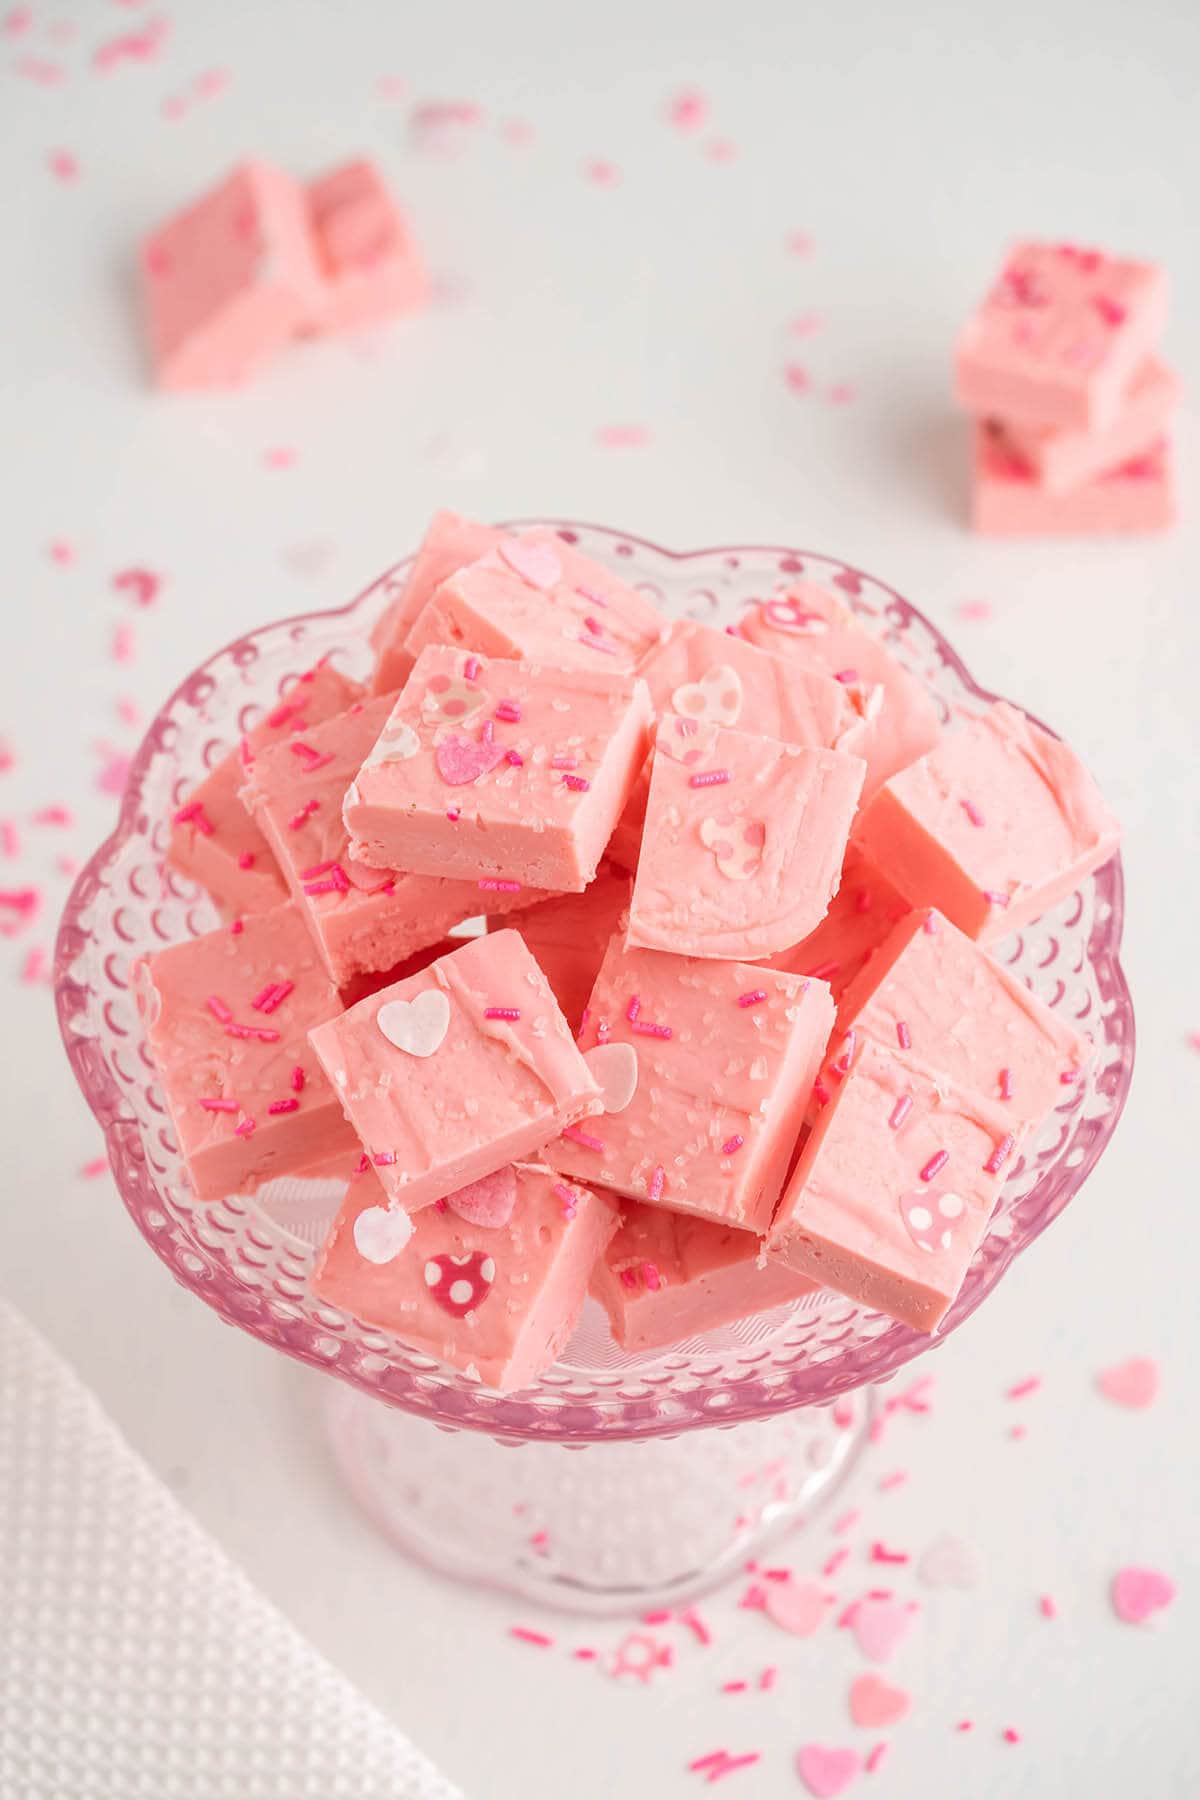 Strawberry fudge decorated with sprinkles in pink bowl.